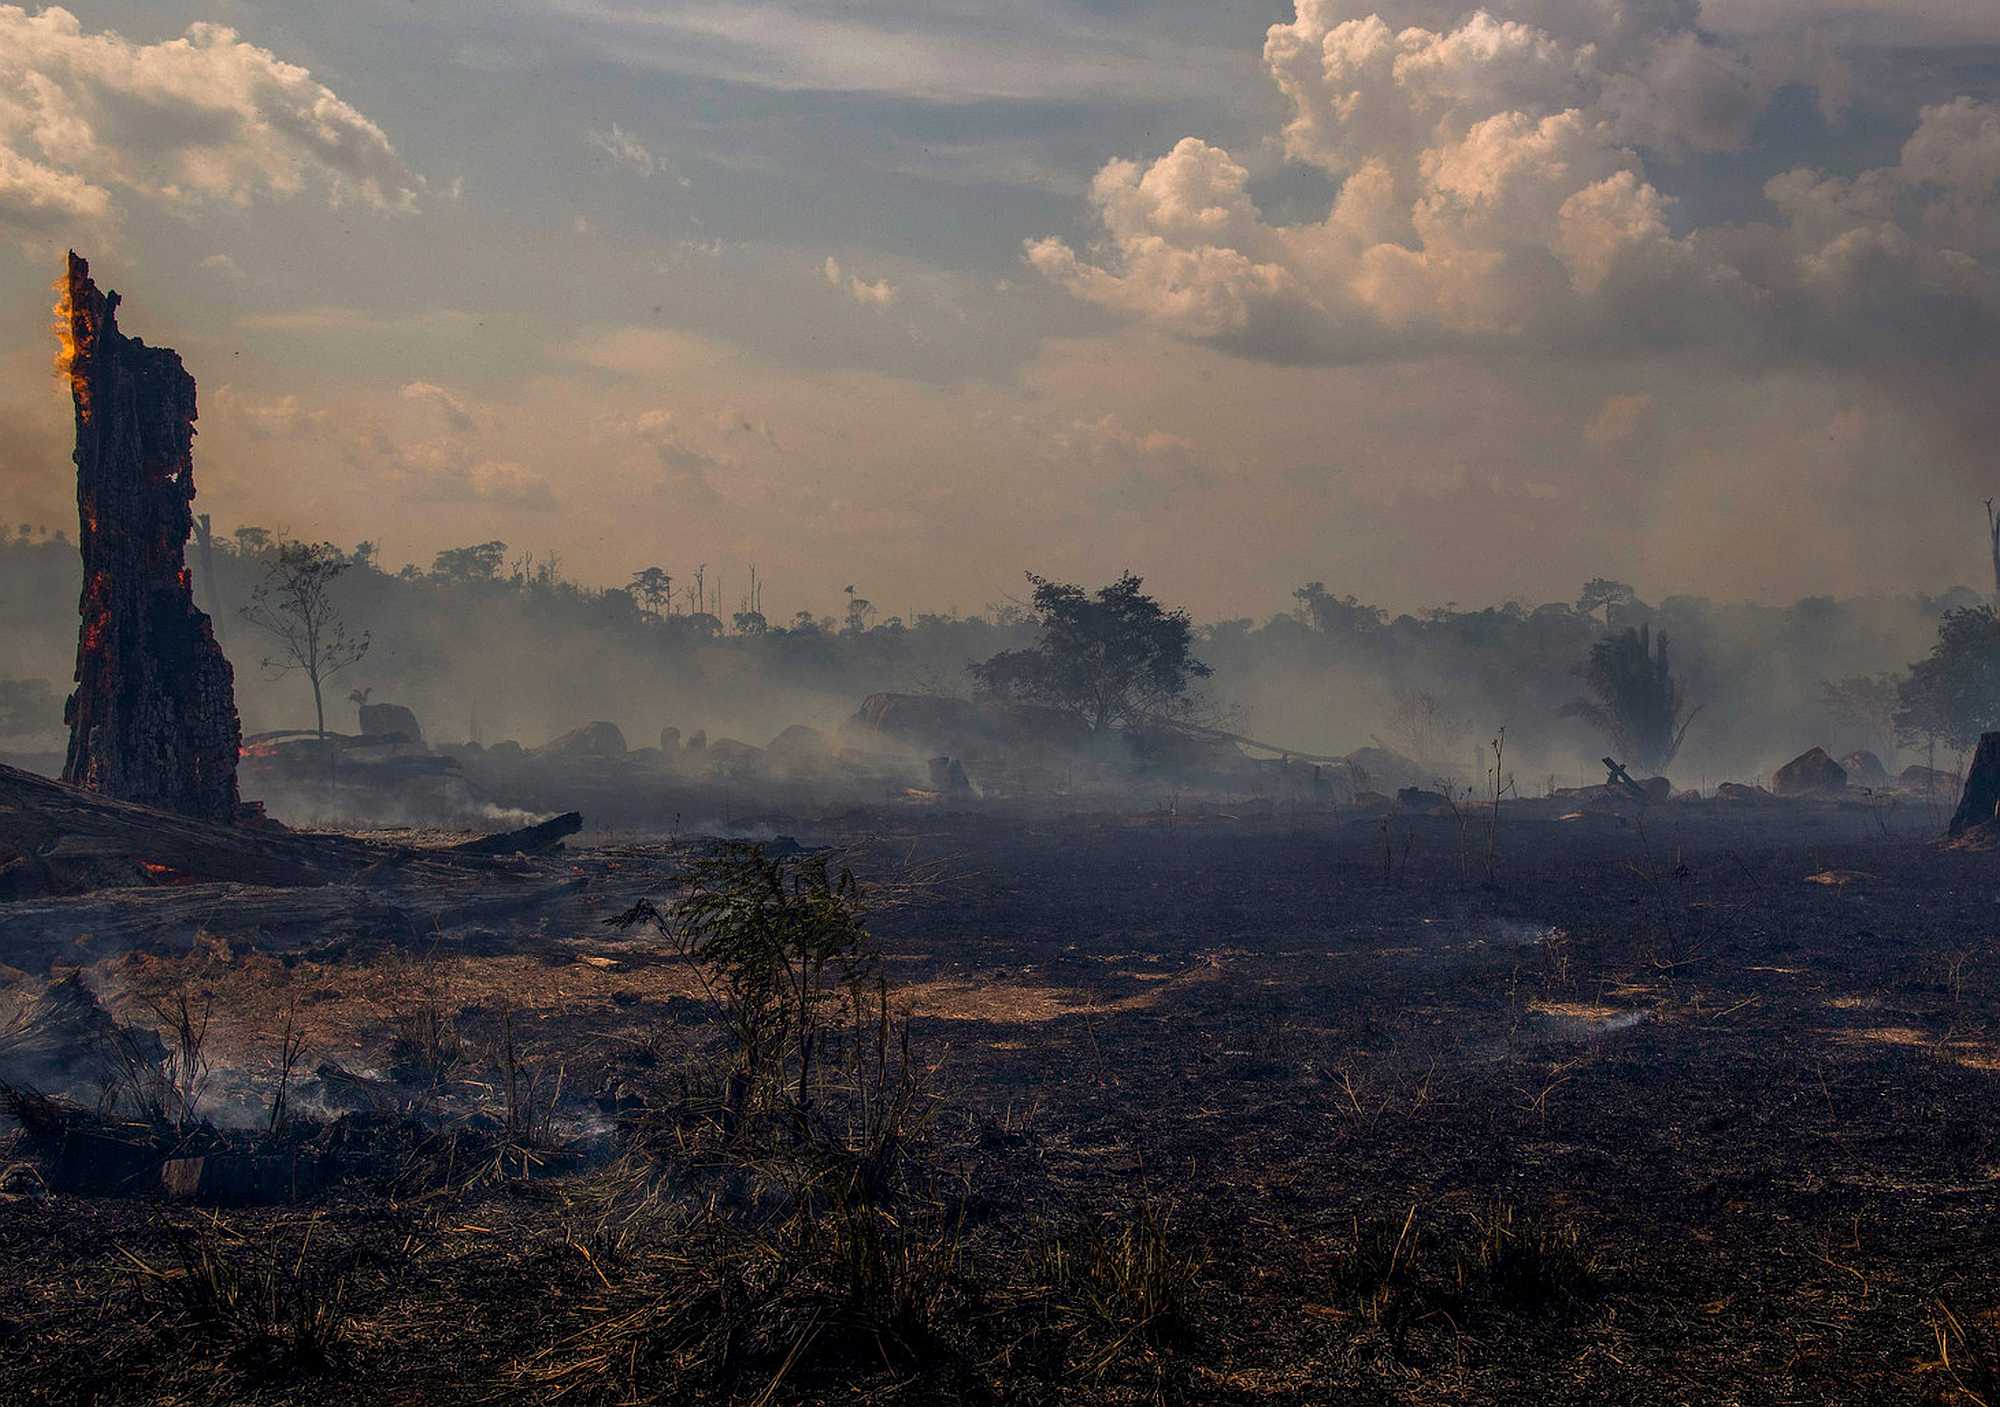 Burning the trees to raise cattle in the Brazilian Amazon